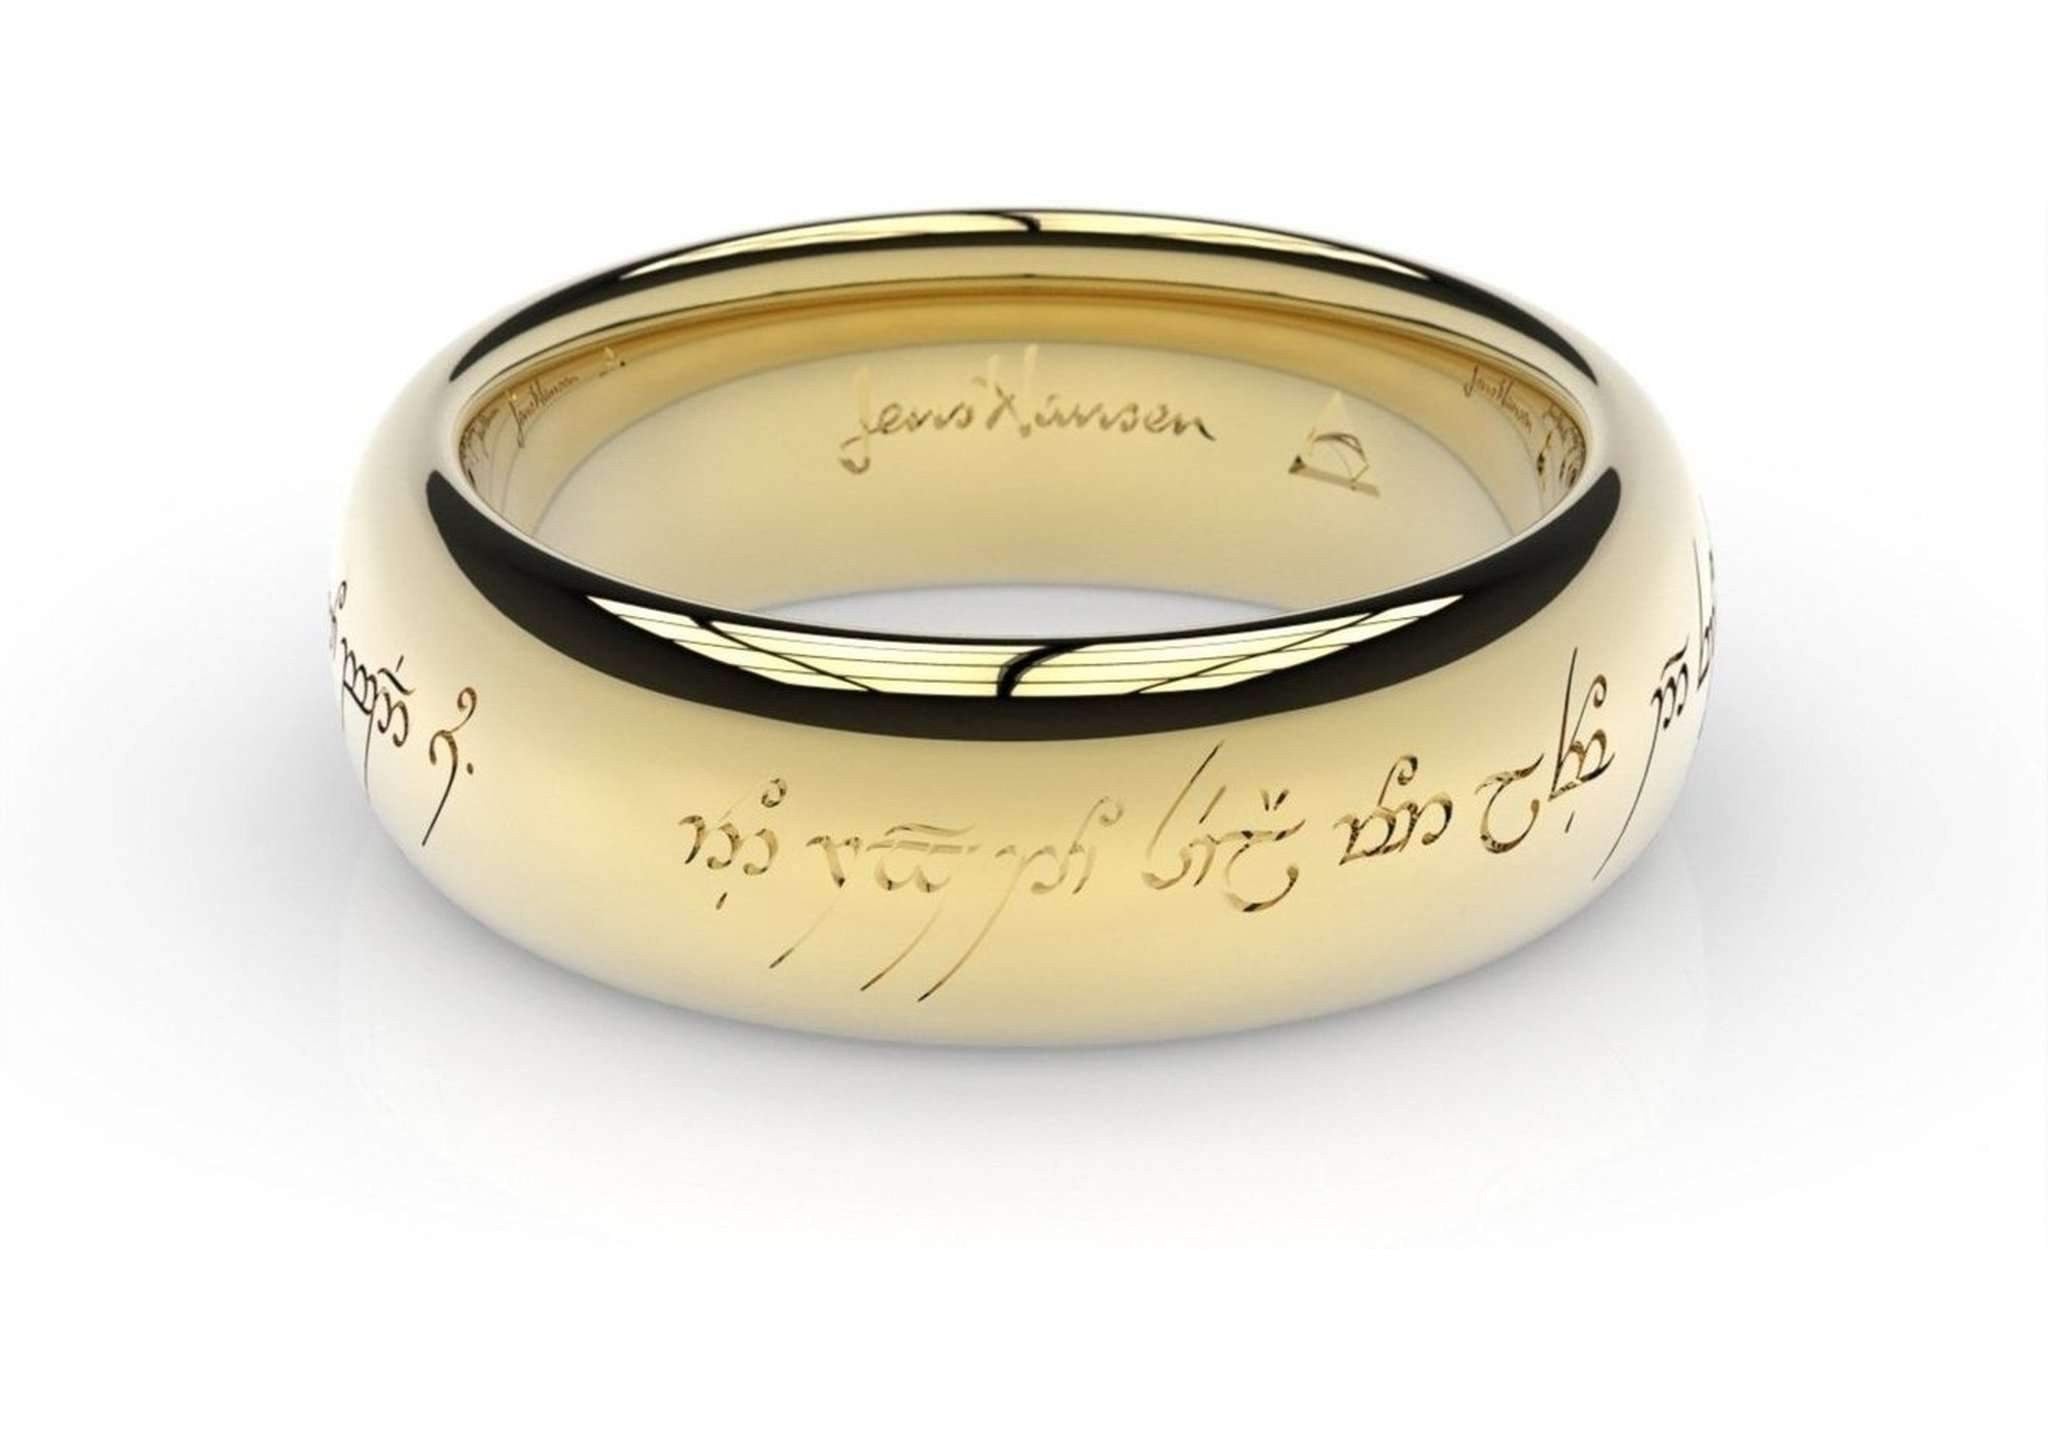 what does the inscription on the lord of the rings ring say